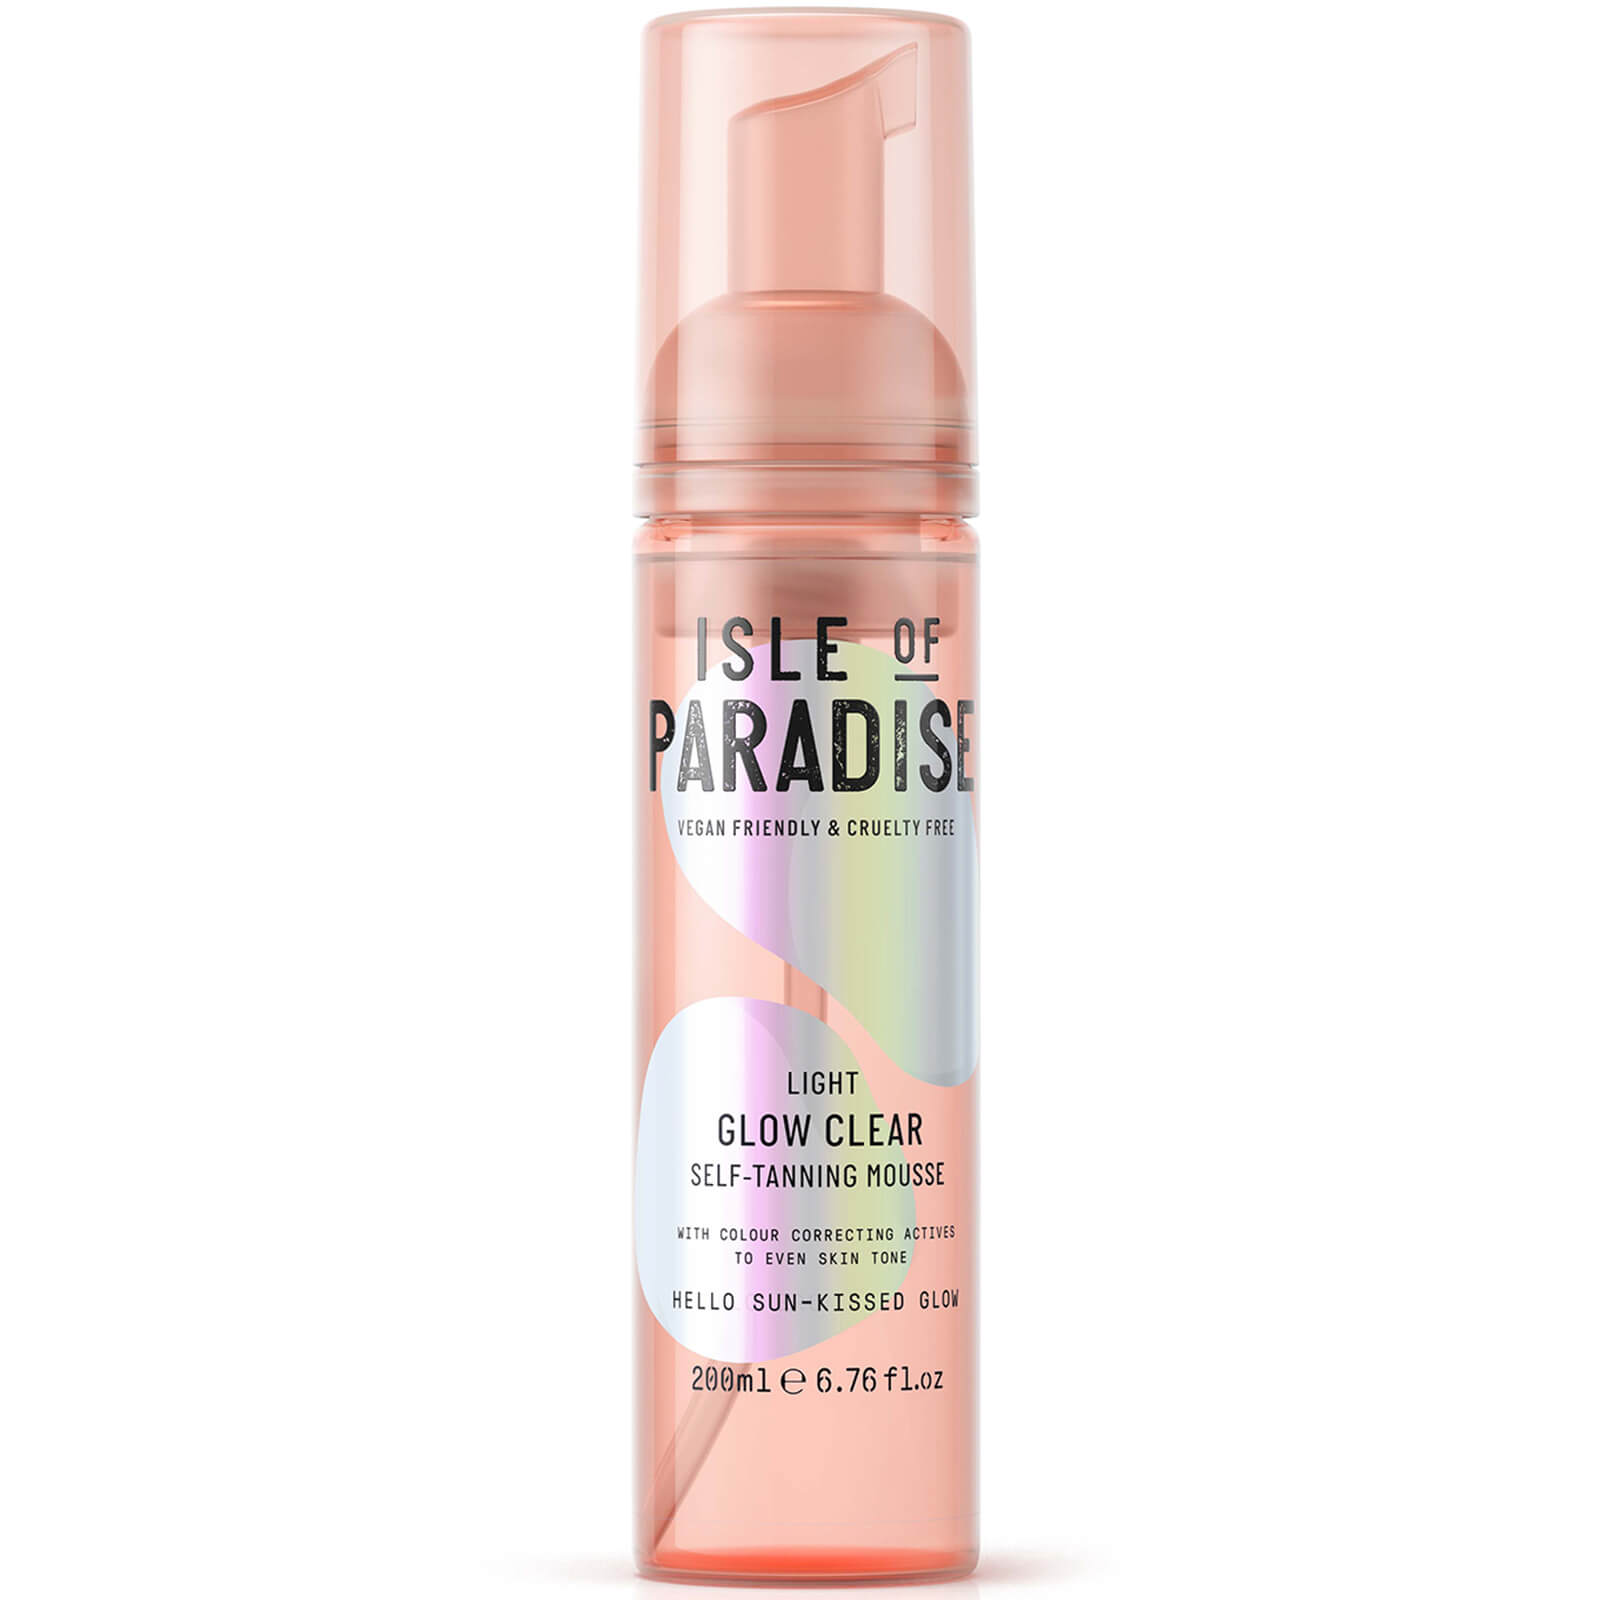 Photos - Hair Styling Product Isle of Paradise Glow Clear Self-Tanning Mousse - Light 200ml 890024